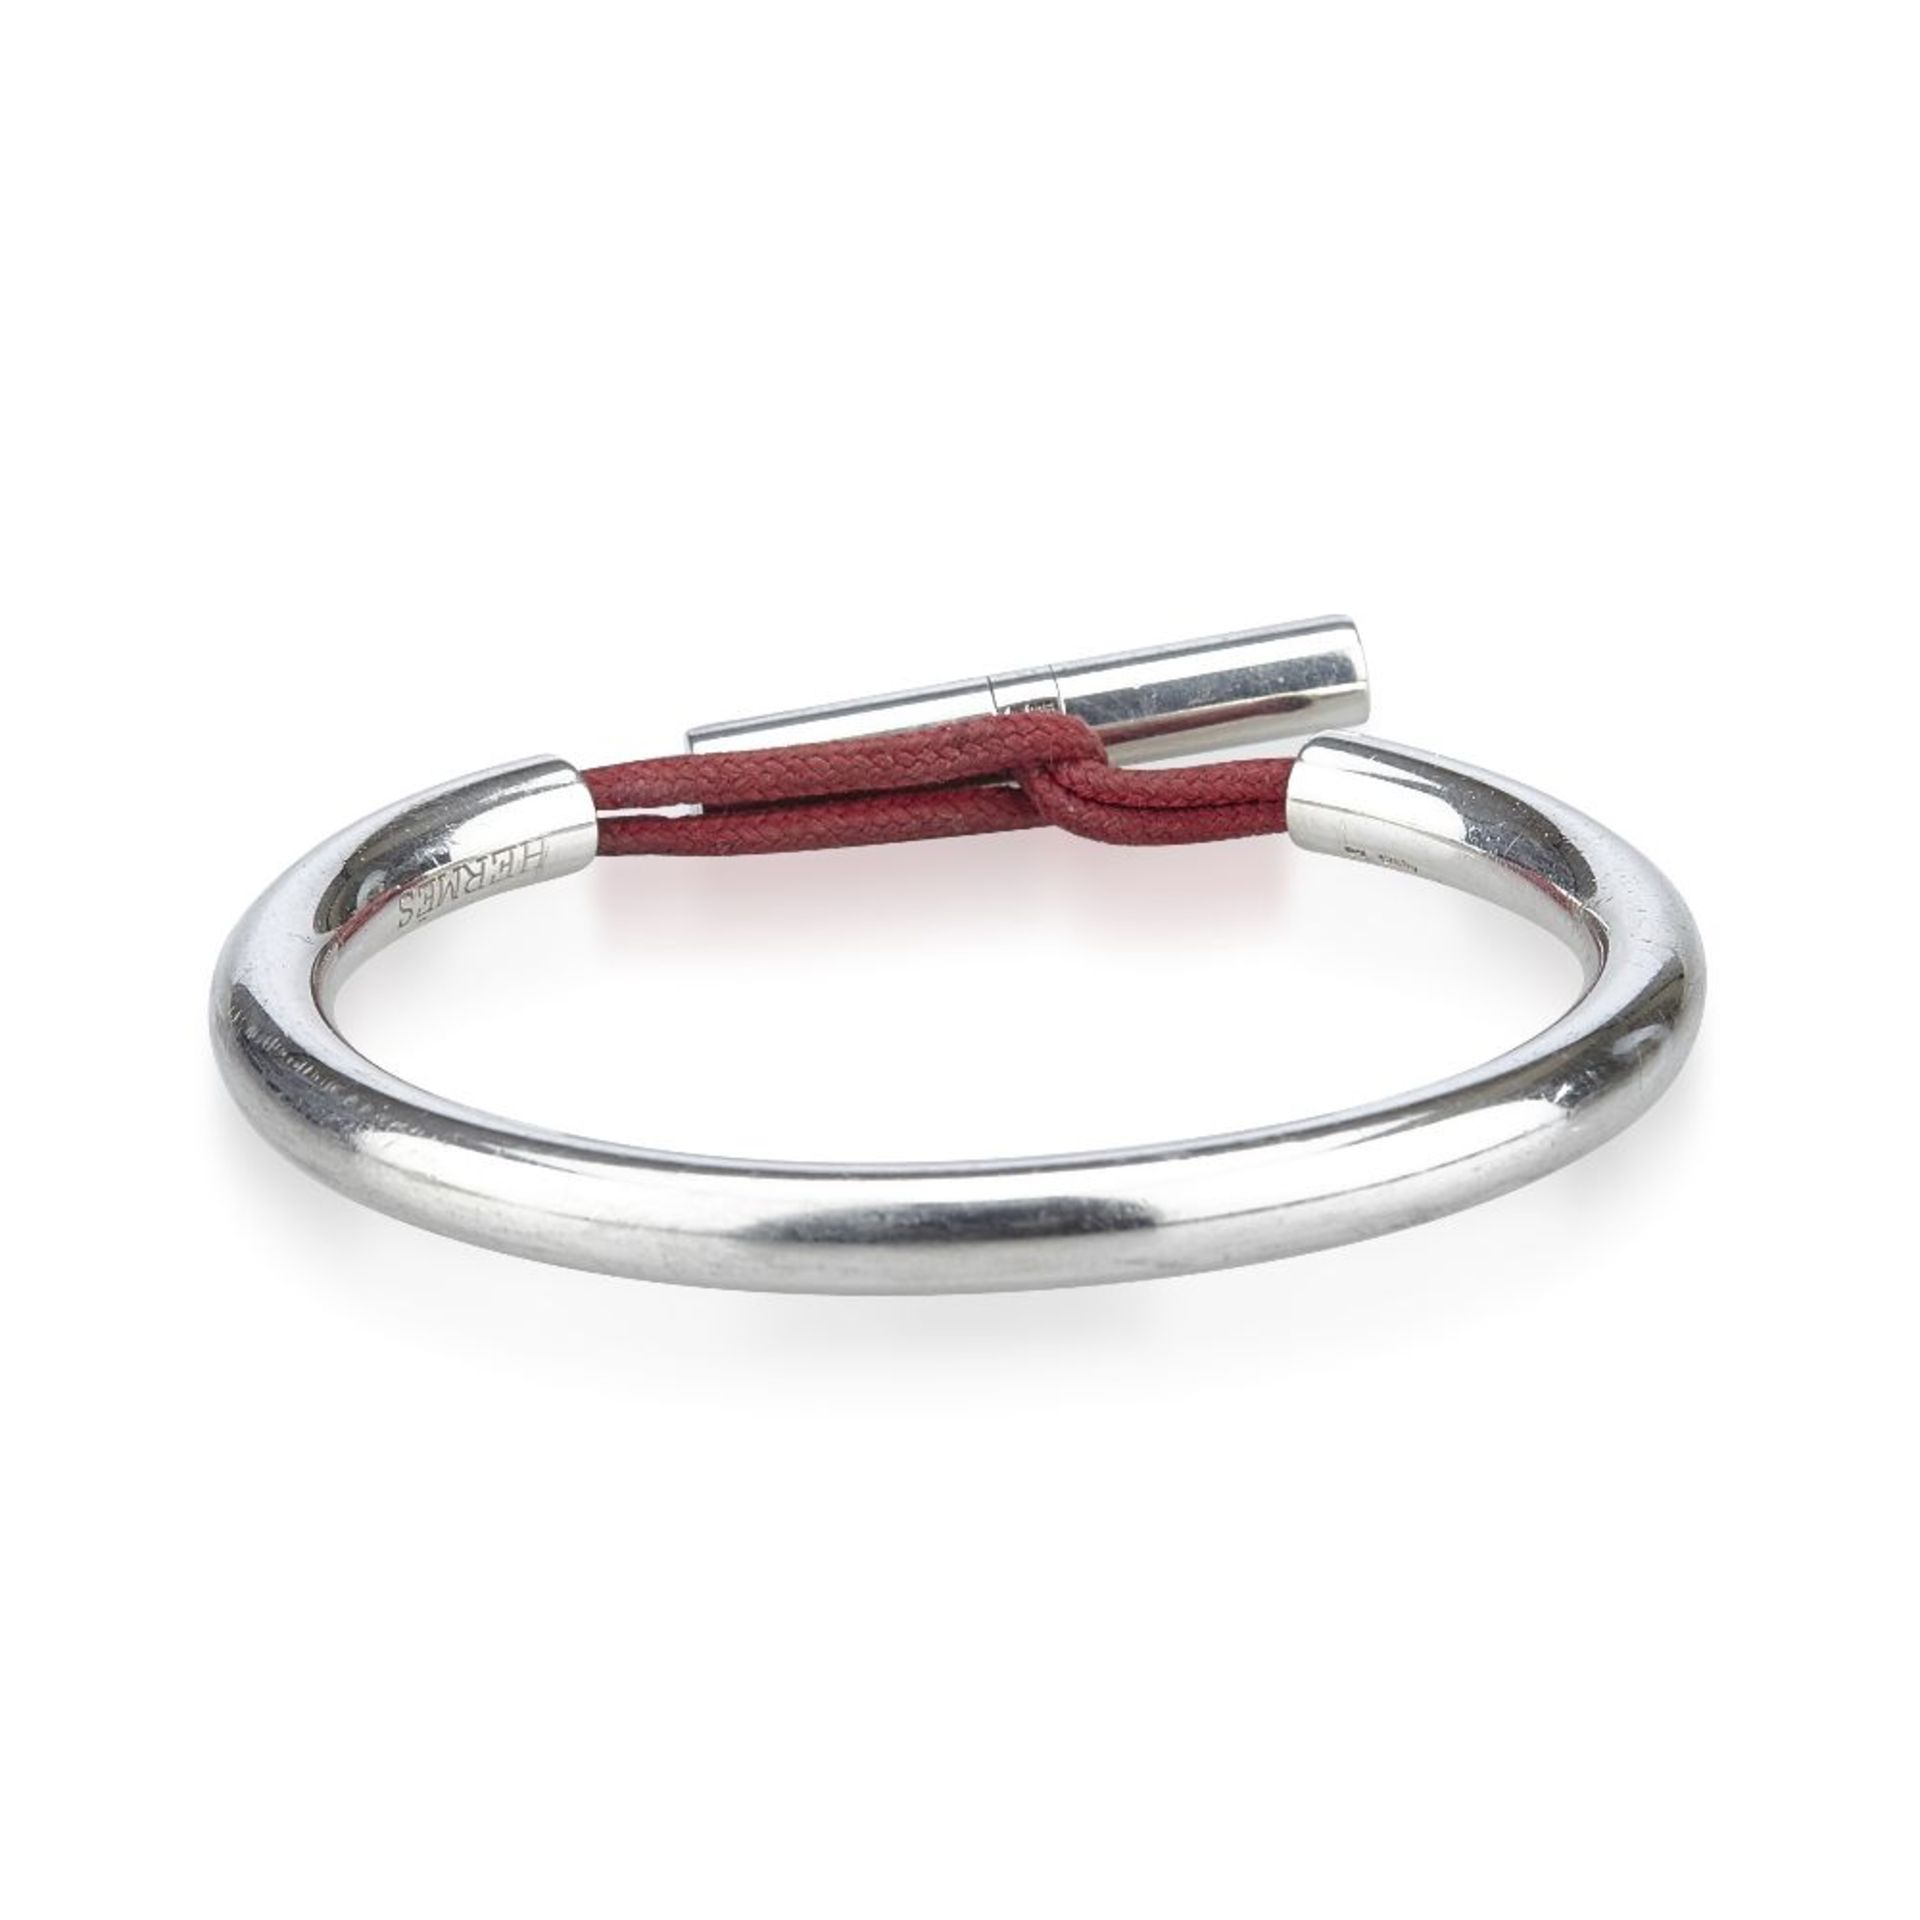 An Hermès 'Skipper' bracelet,featuring a silver and chemical fibre body - Image 3 of 7